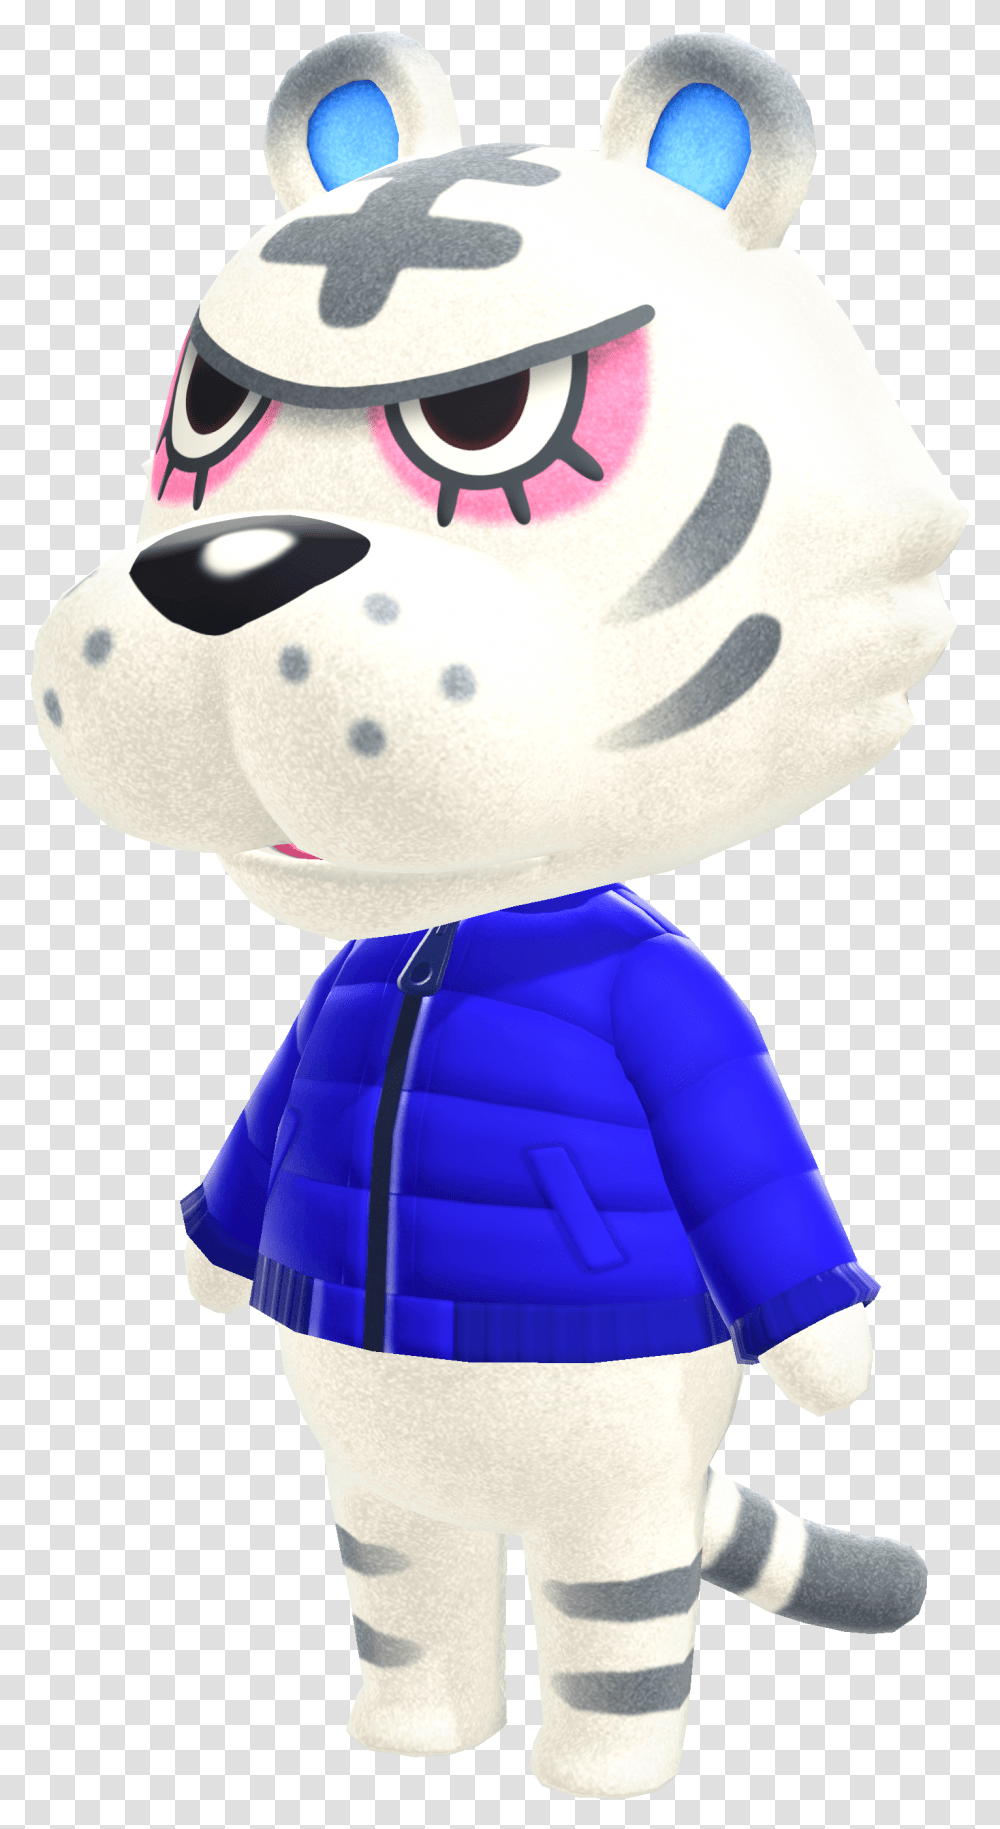 Rolf Animal Crossing Item And Villager Database Villagerdb Tiger Villager Animal Crossing, Toy, Doll, Performer, Person Transparent Png